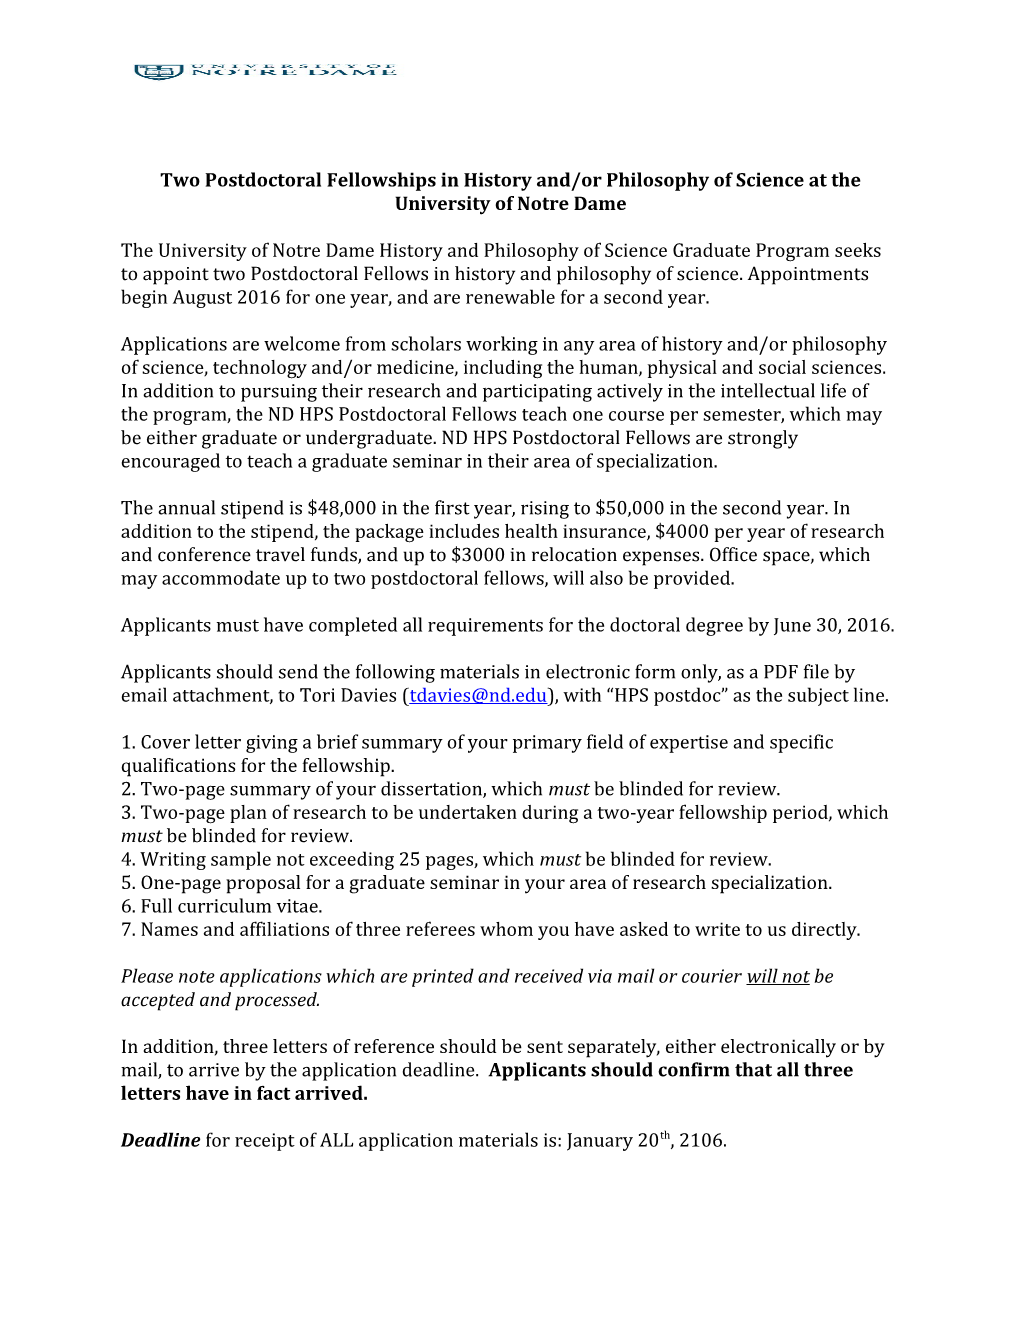 Two Postdoctoral Fellowships in History And/Or Philosophy of Science at the University